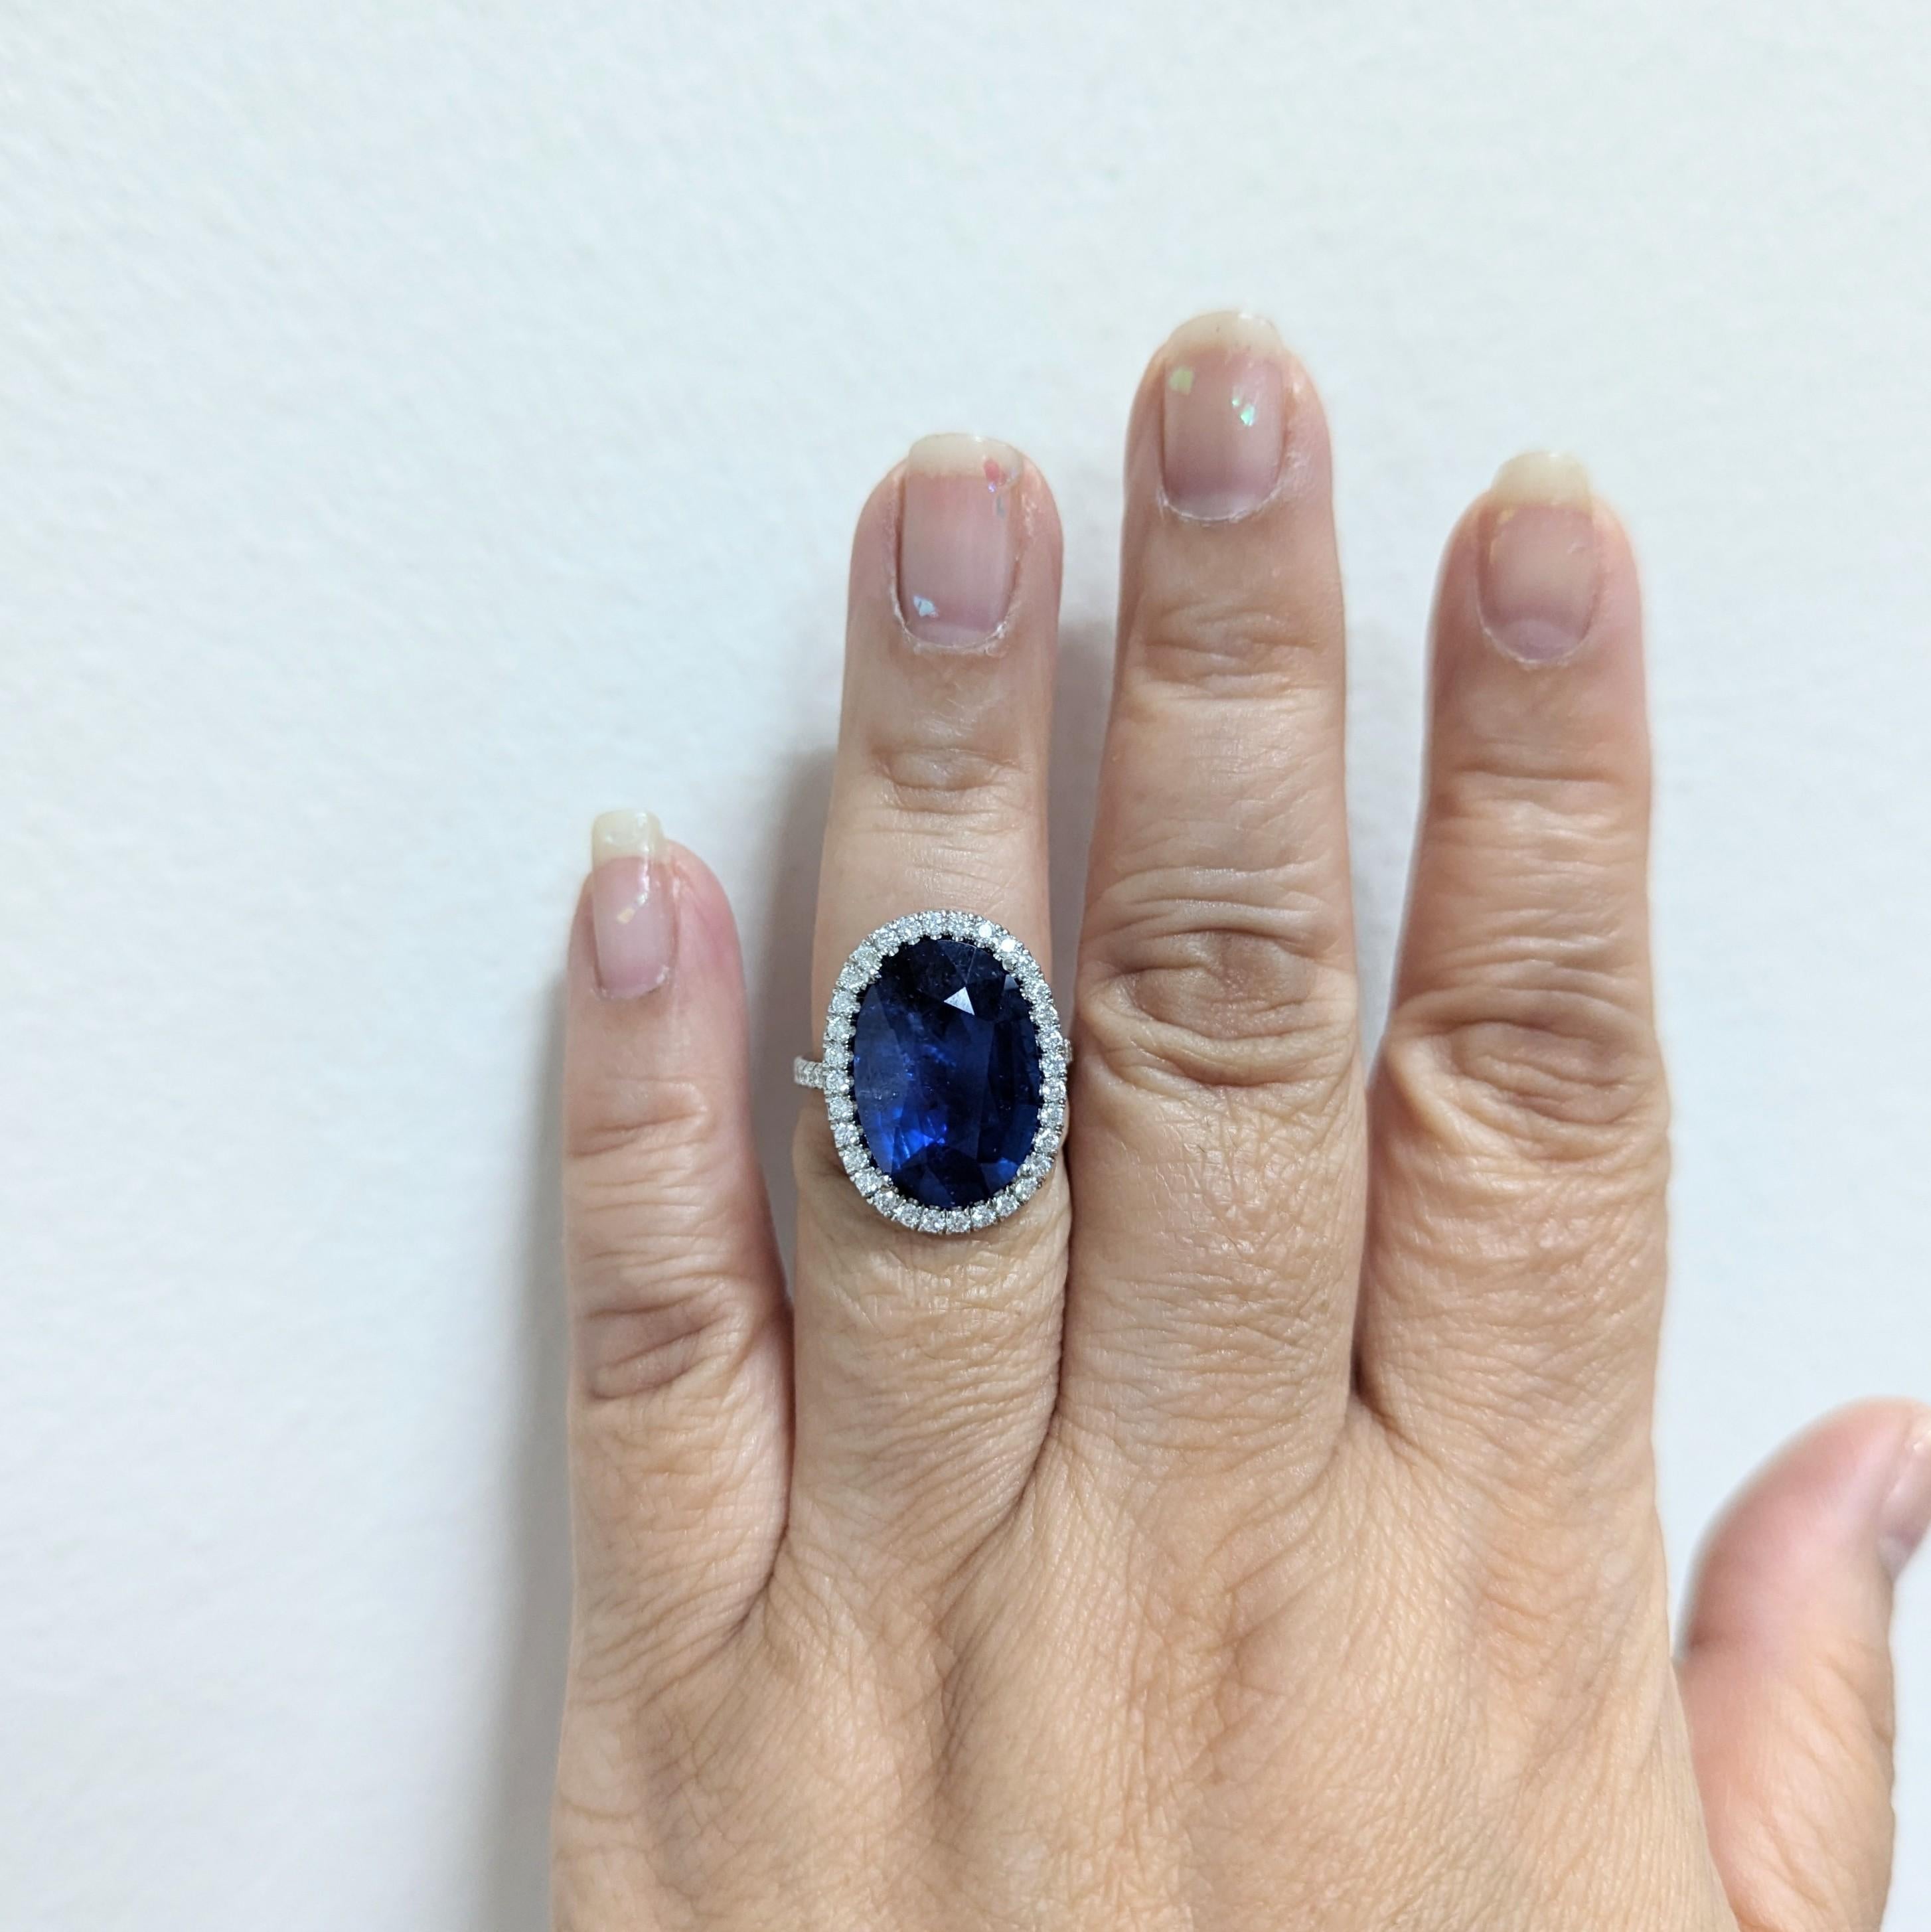 Gorgeous 10.88 ct. GIA Sri Lanka blue sapphire oval with 0.80 ct. good quality, white, and bright diamond rounds.  Handmade in platinum.  Ring size 6.5.  GIA certificate included.